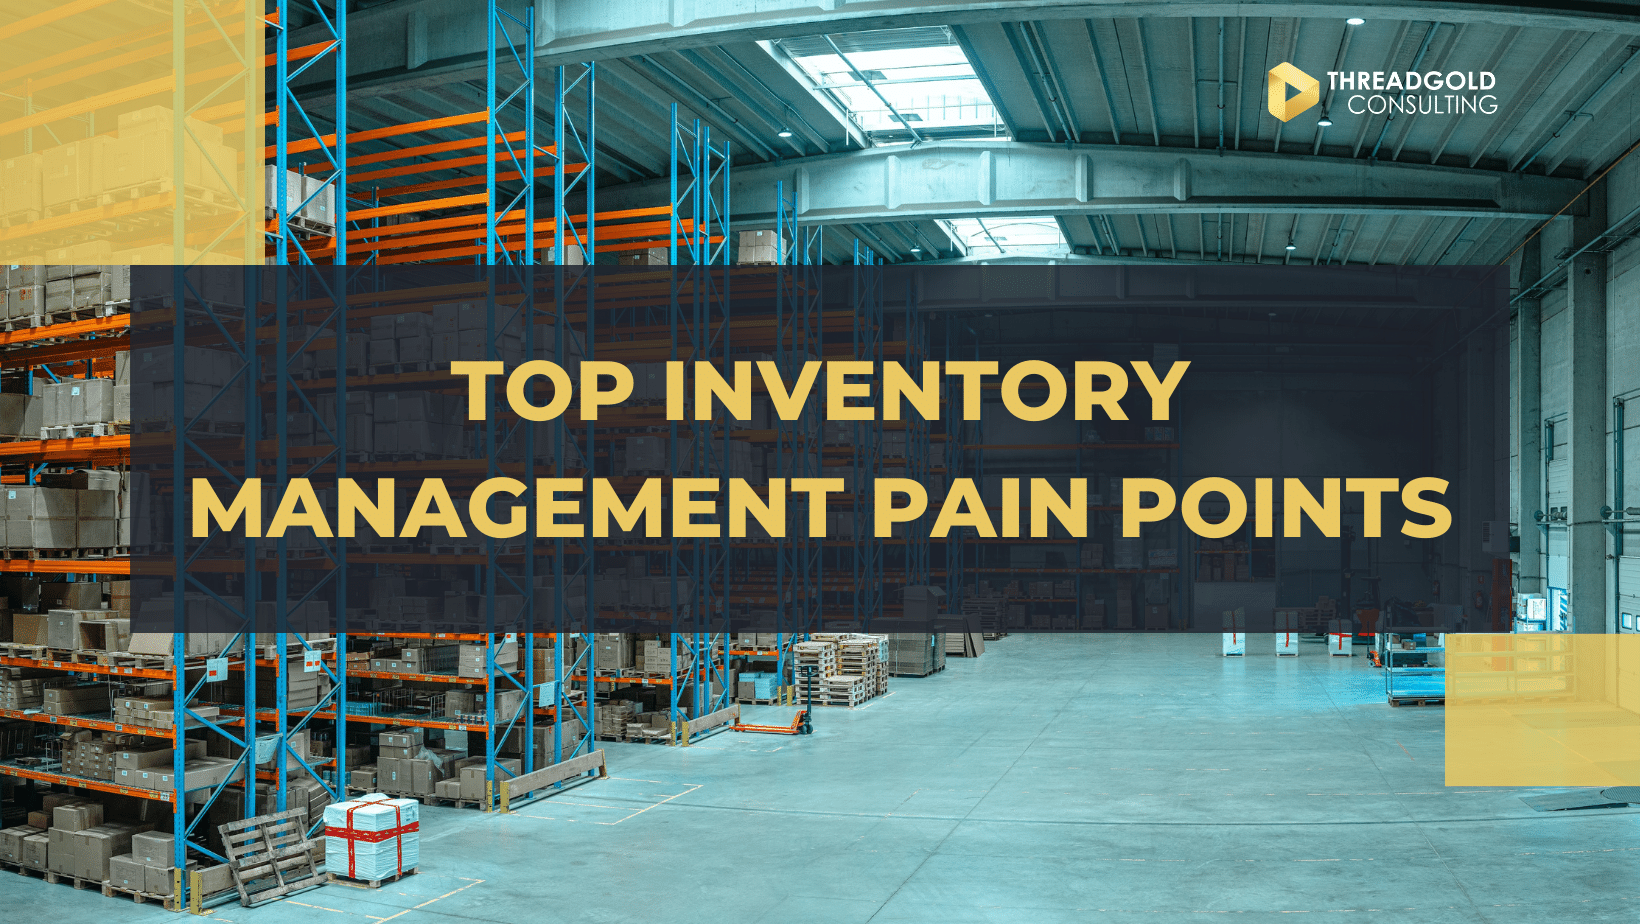 Top Inventory Management Pain Points